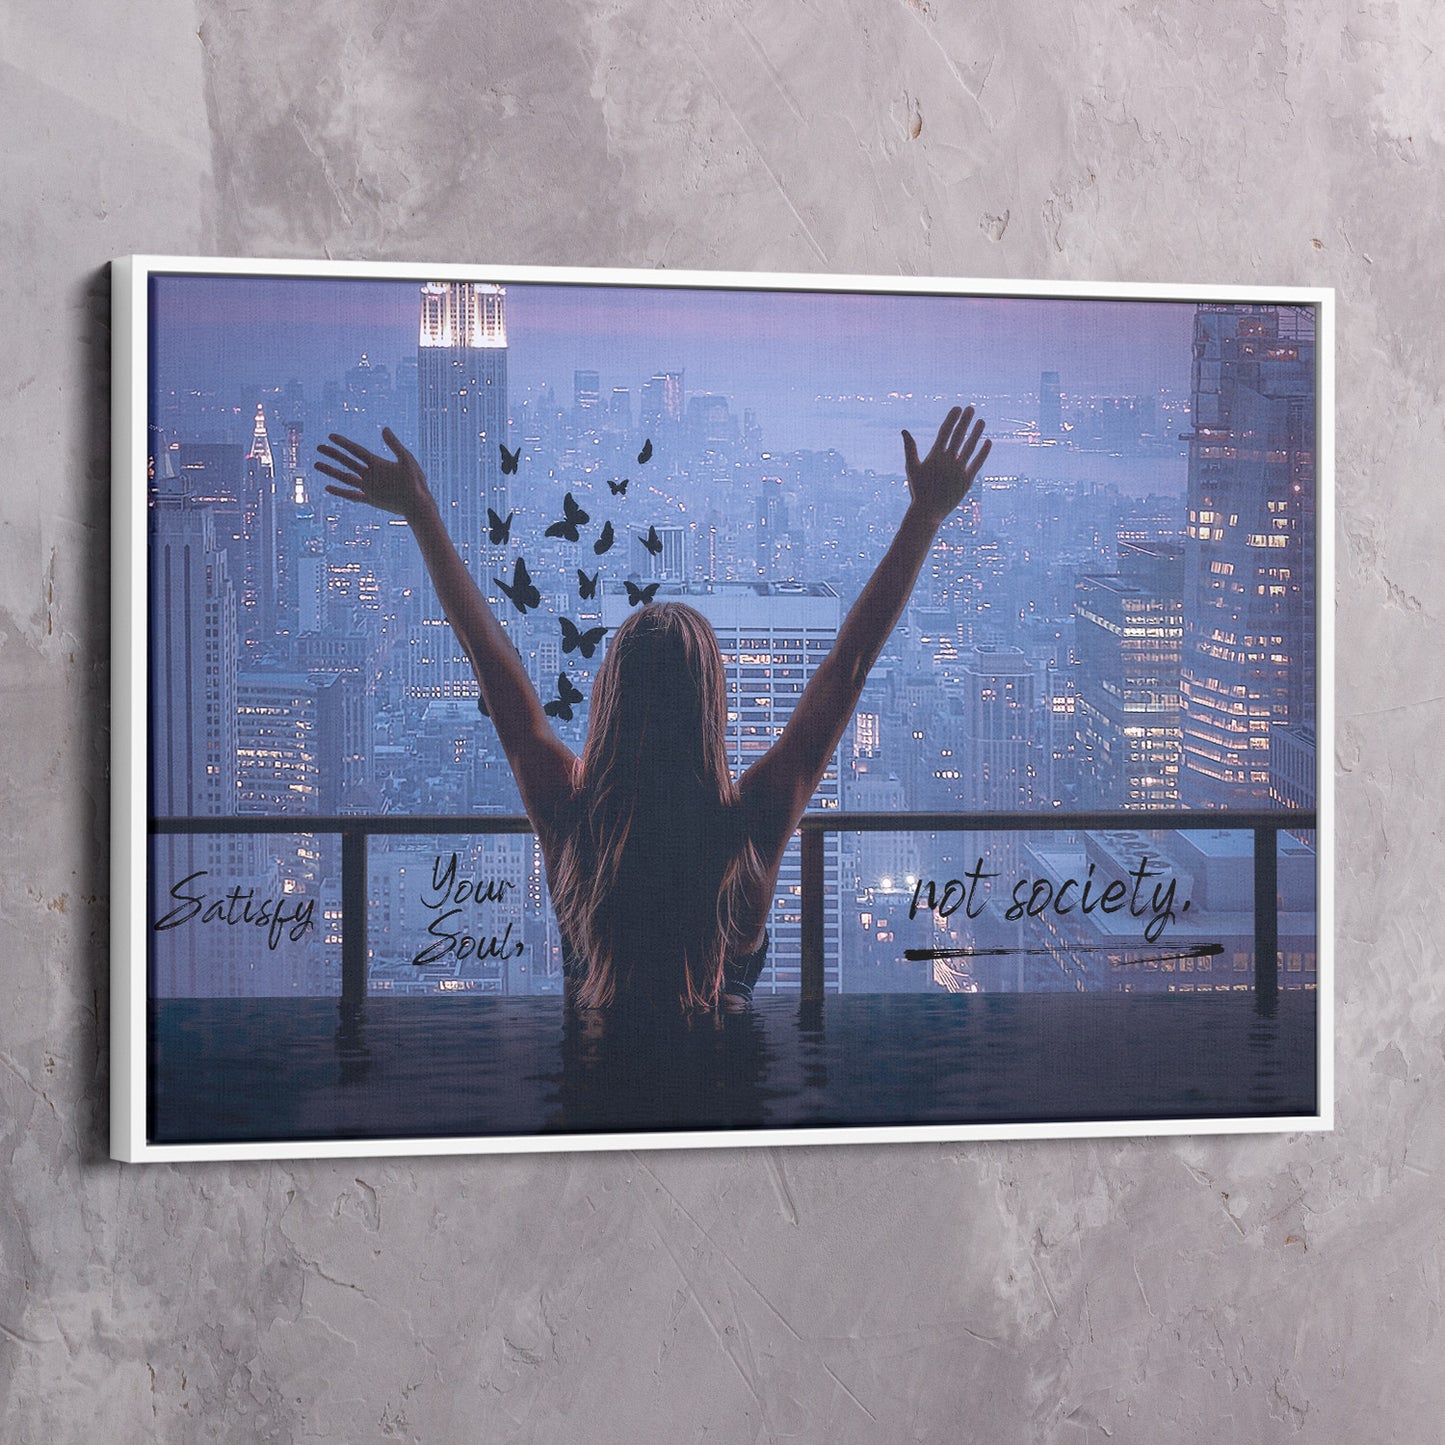 Satisfy Your Soul - Shop exclusive inspirational wall art, motivational wall art, office art, home office wall decor quotes, wall art quotes, office artwork, motivational art only at ImpaktMaker in canvas and acrylic formats.